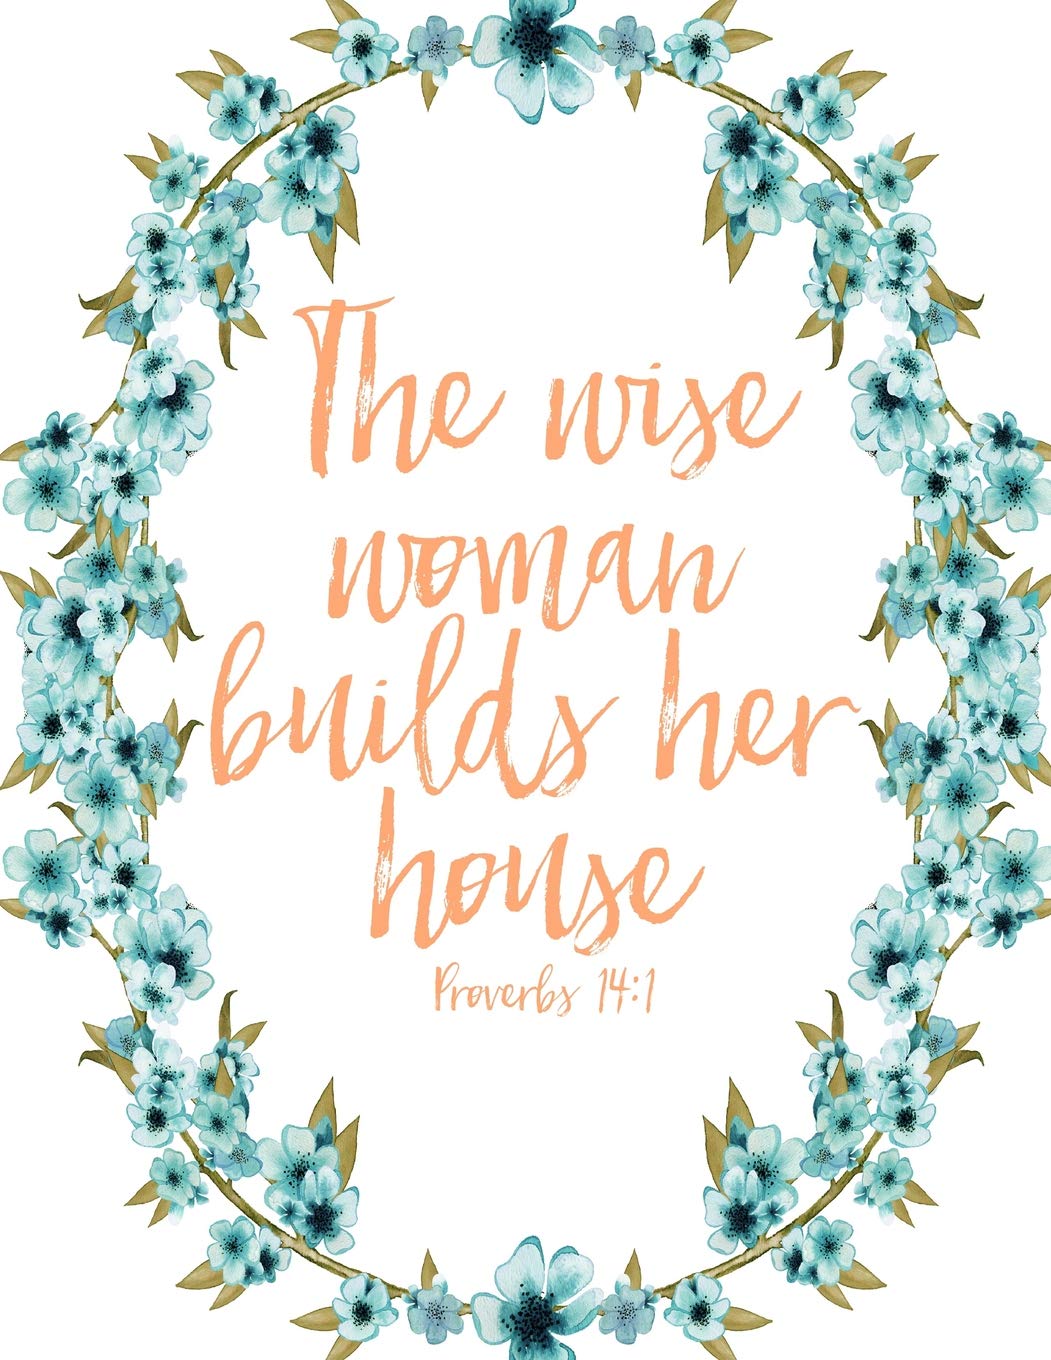 Proverb 14:1 Wise Woman SOAP Journal: 120 S.O.A.P. Pages, 8.5x11 Love Never Fails SOAP Notebook, Christian Women And Girls Bible Study Guide, Quiet Time Devotional (SOAP Journals)